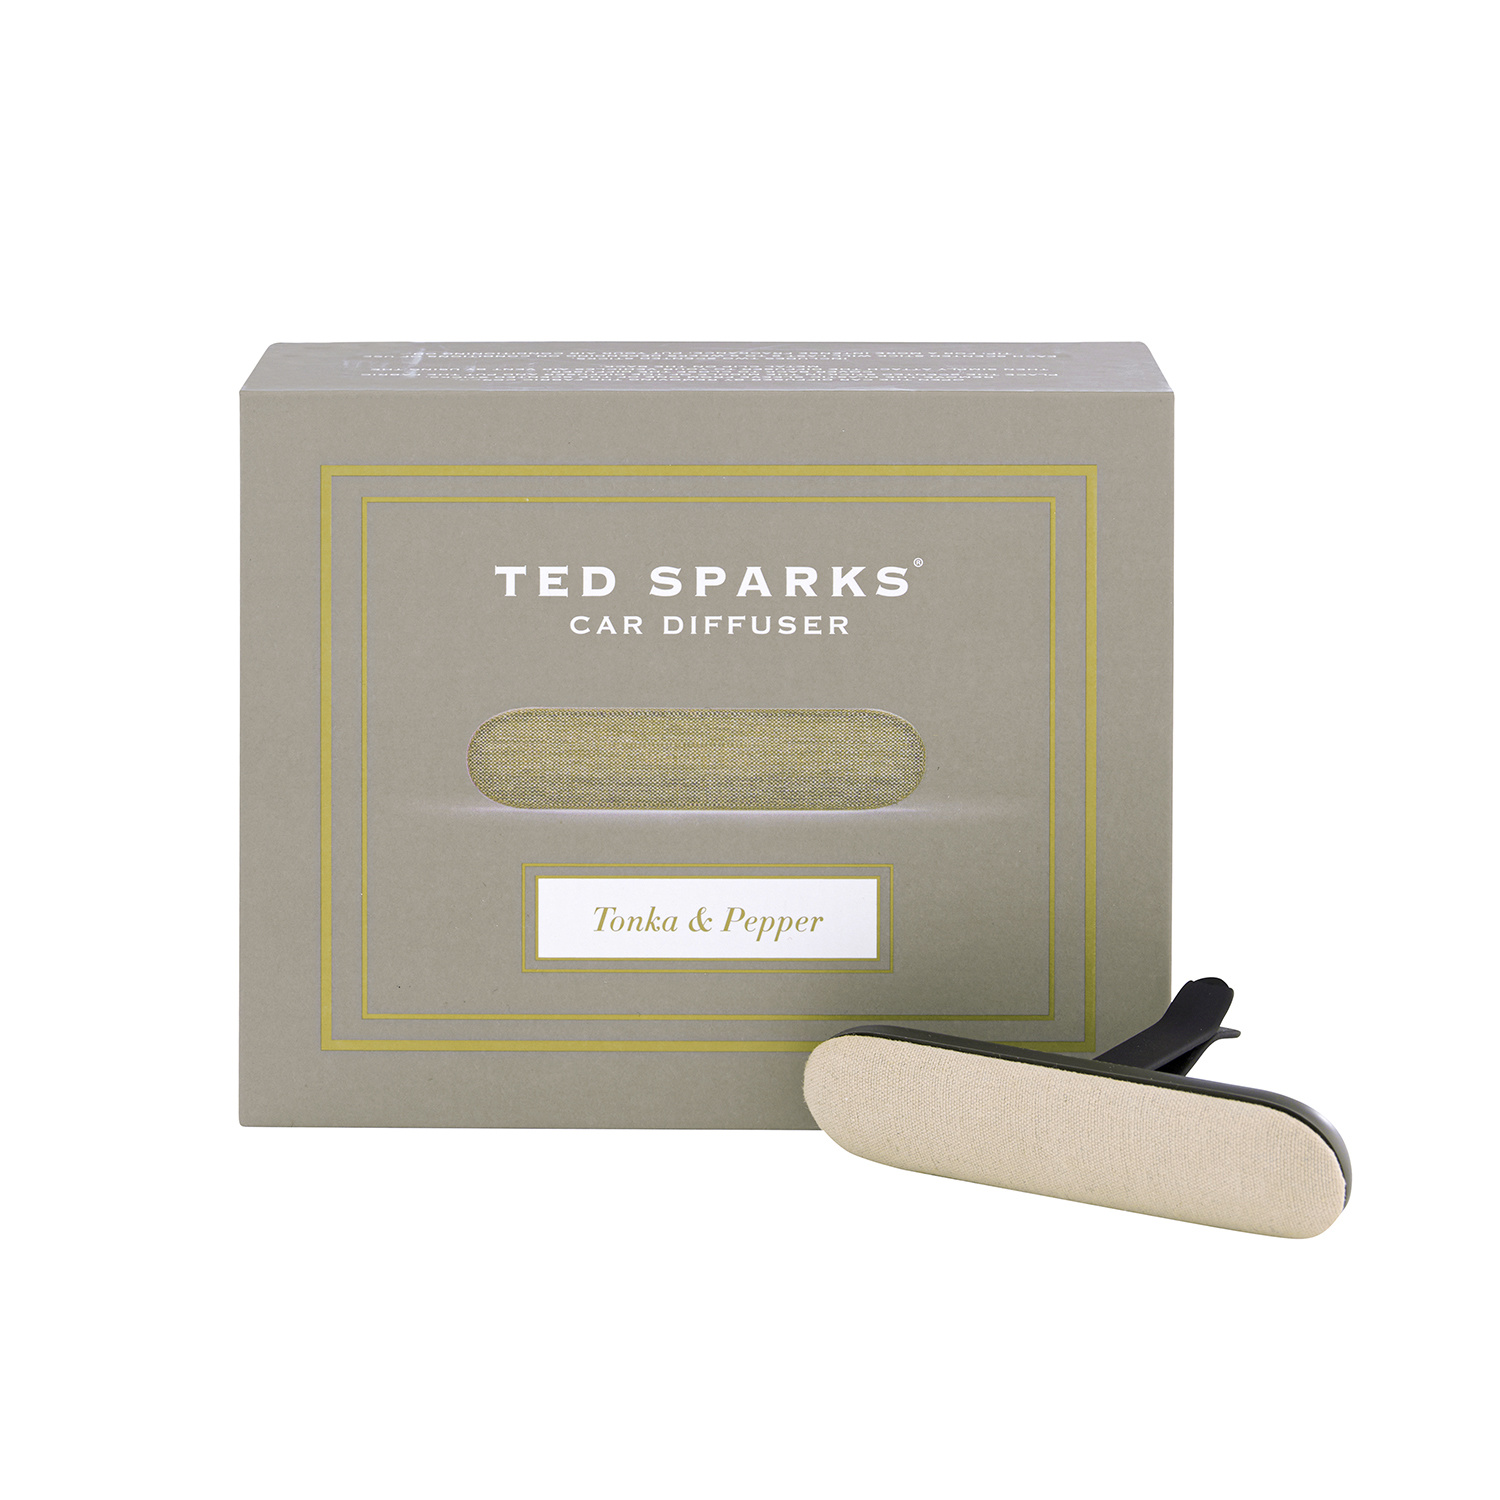 ted-sparks-car-diffuser-tonka-pepper